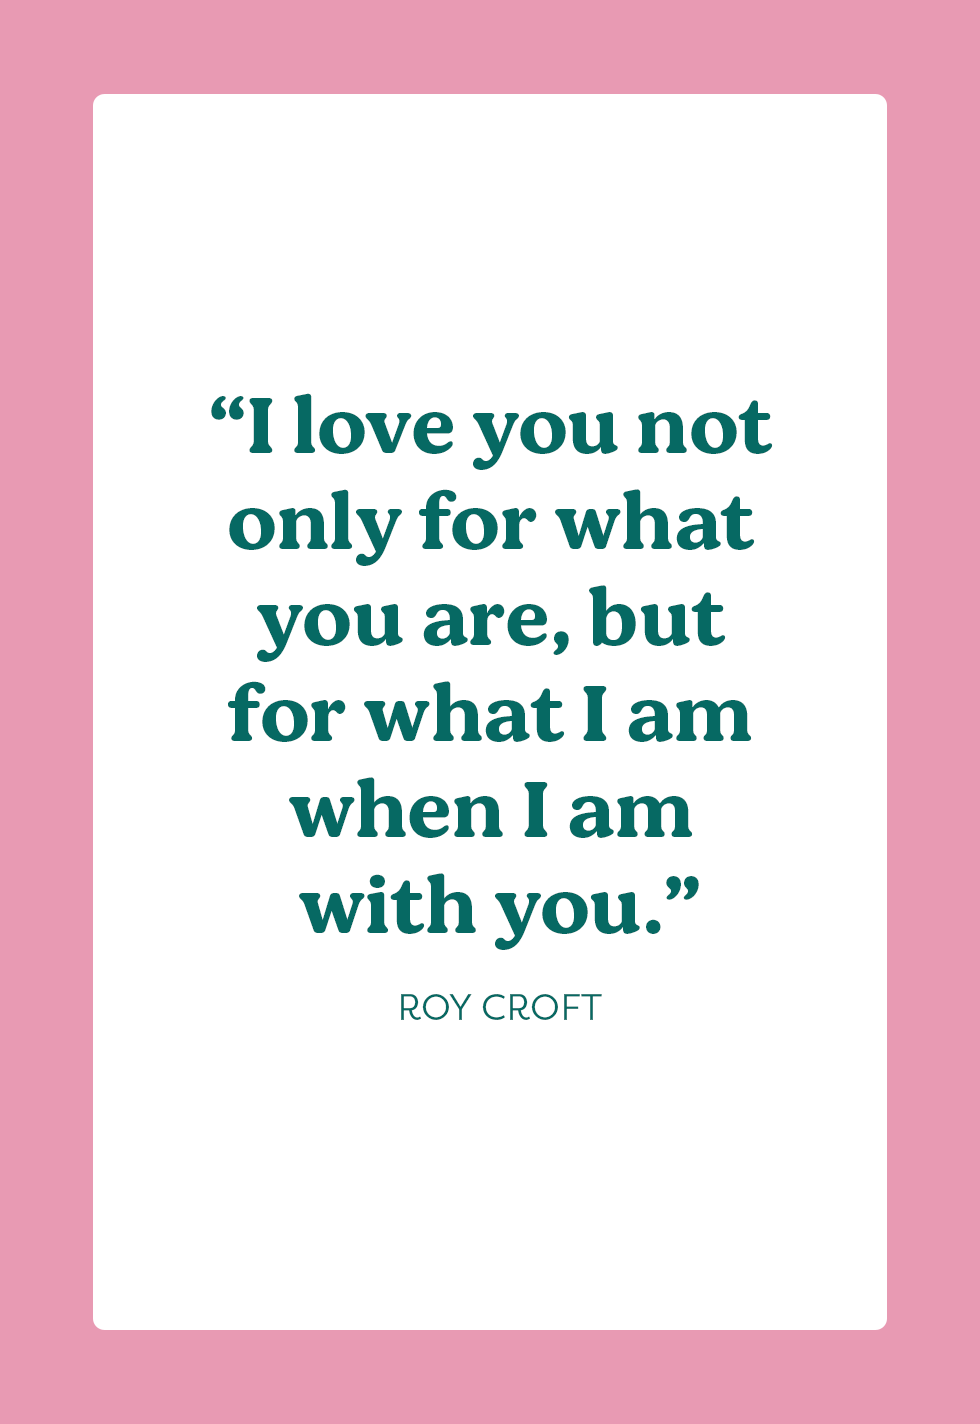 75 Love Quotes - Famous Sayings About Love